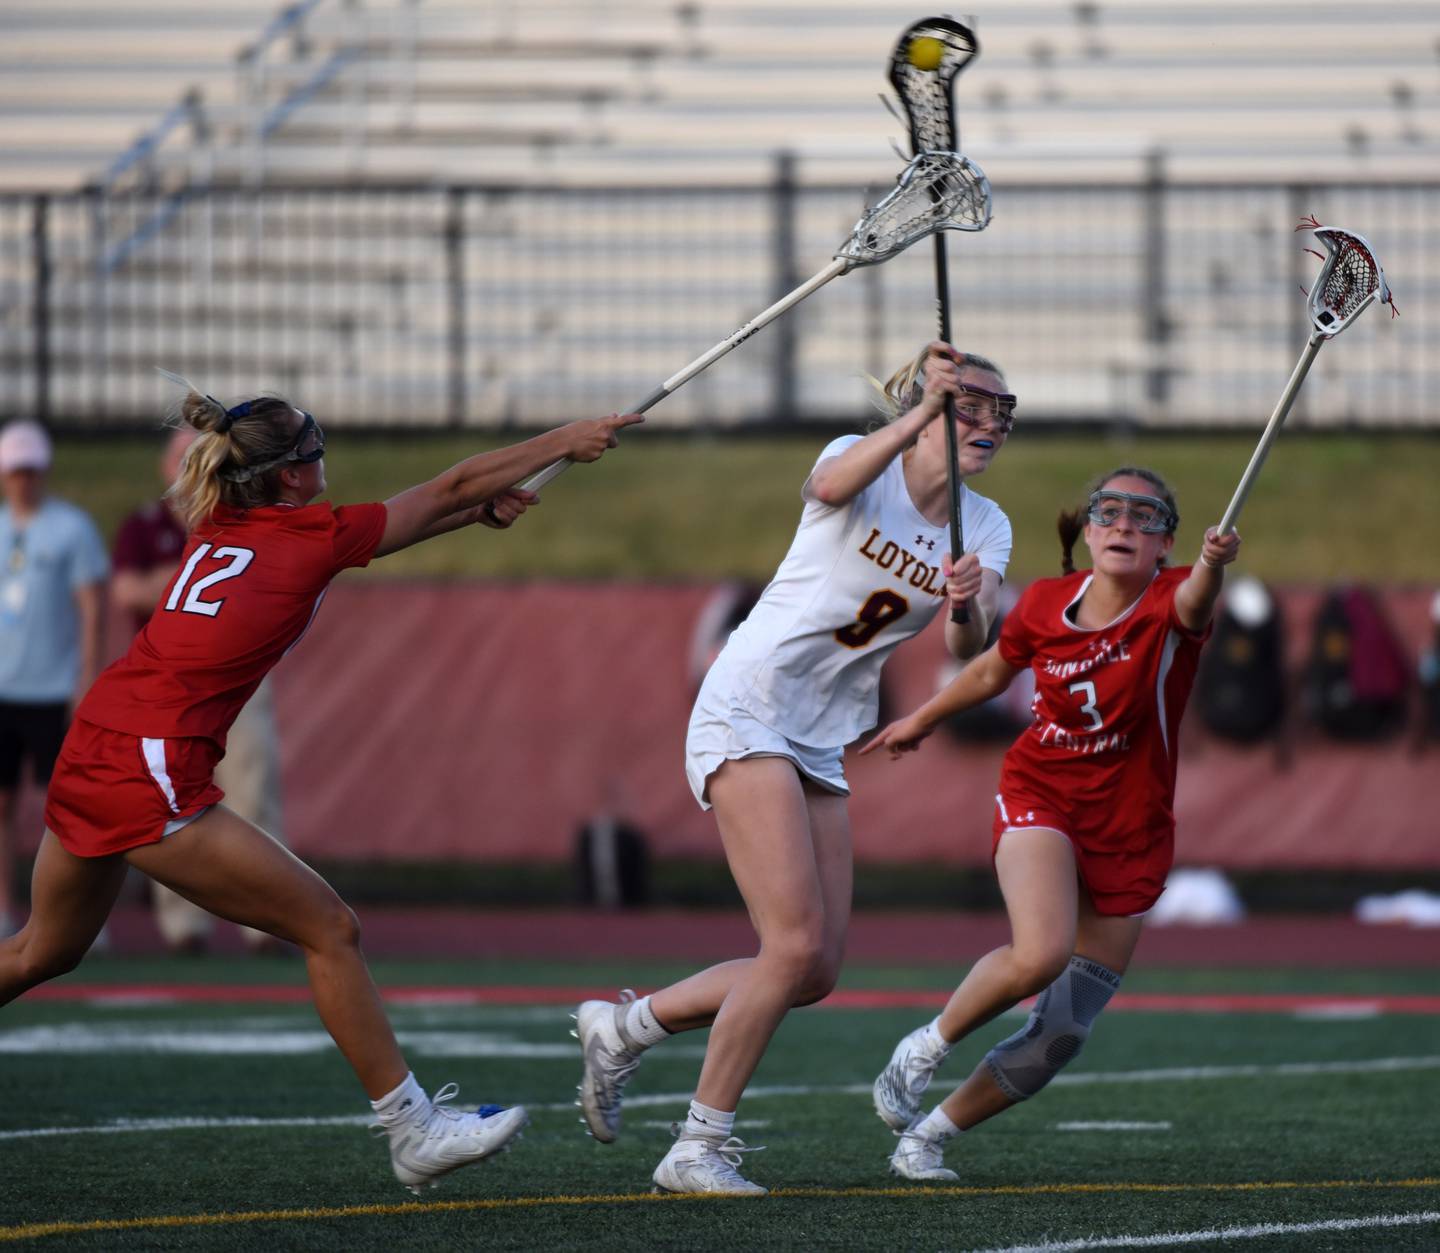 Joe Lewnard/jlewnard@dailyherald.com
Loyola Academy’s Eileen Dooley scores as she gets between Hinsdale Central’s Ari Tavoso, left, and Amelia Sowers during the girls state lacrosse championship in Hinsdale Saturday.